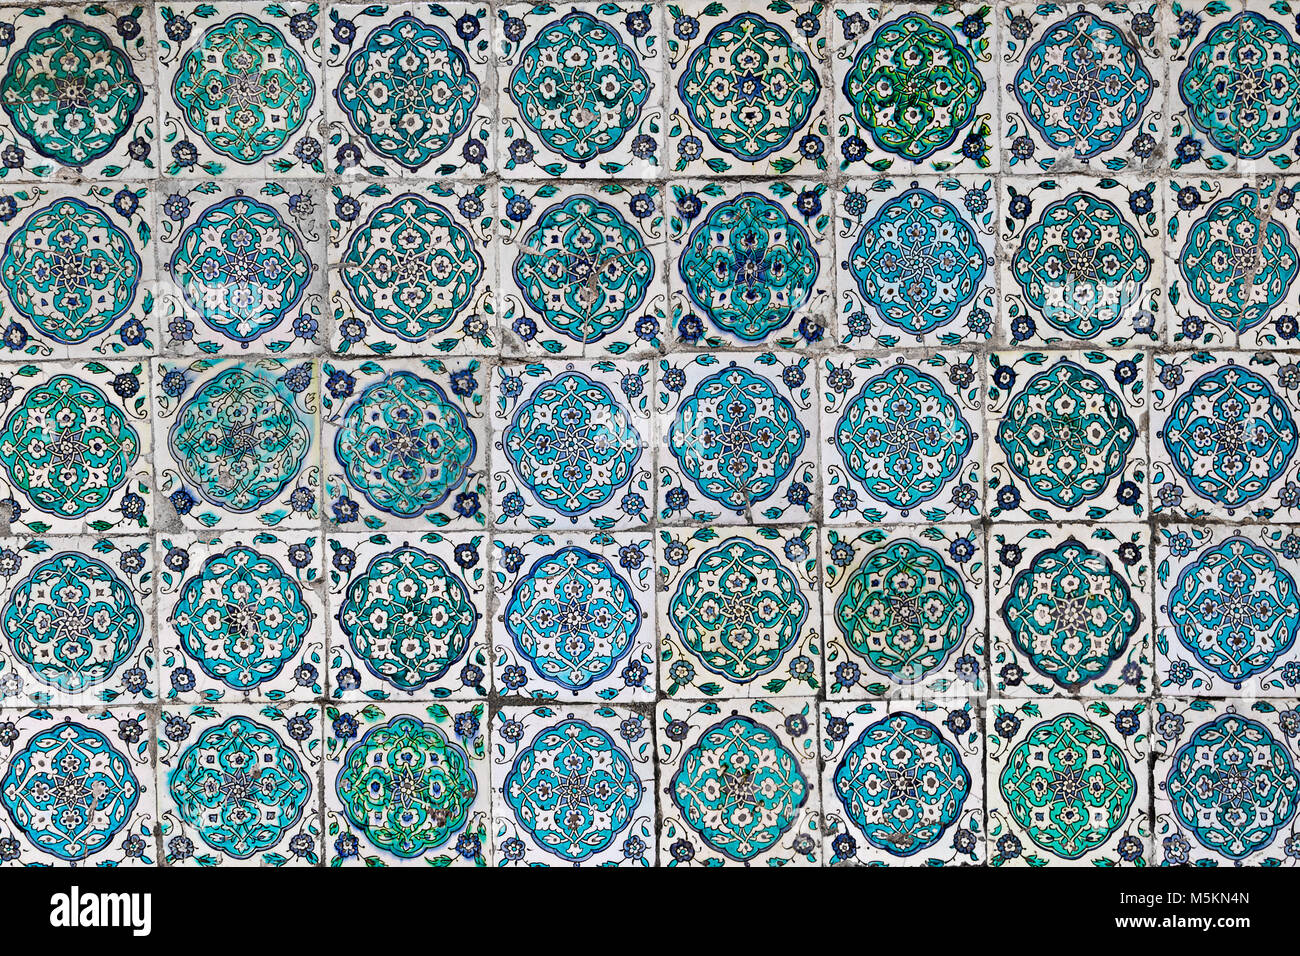 Tiles on the walls of the Topkapi Palace in Istanbul, Turkey Stock Photo -  Alamy